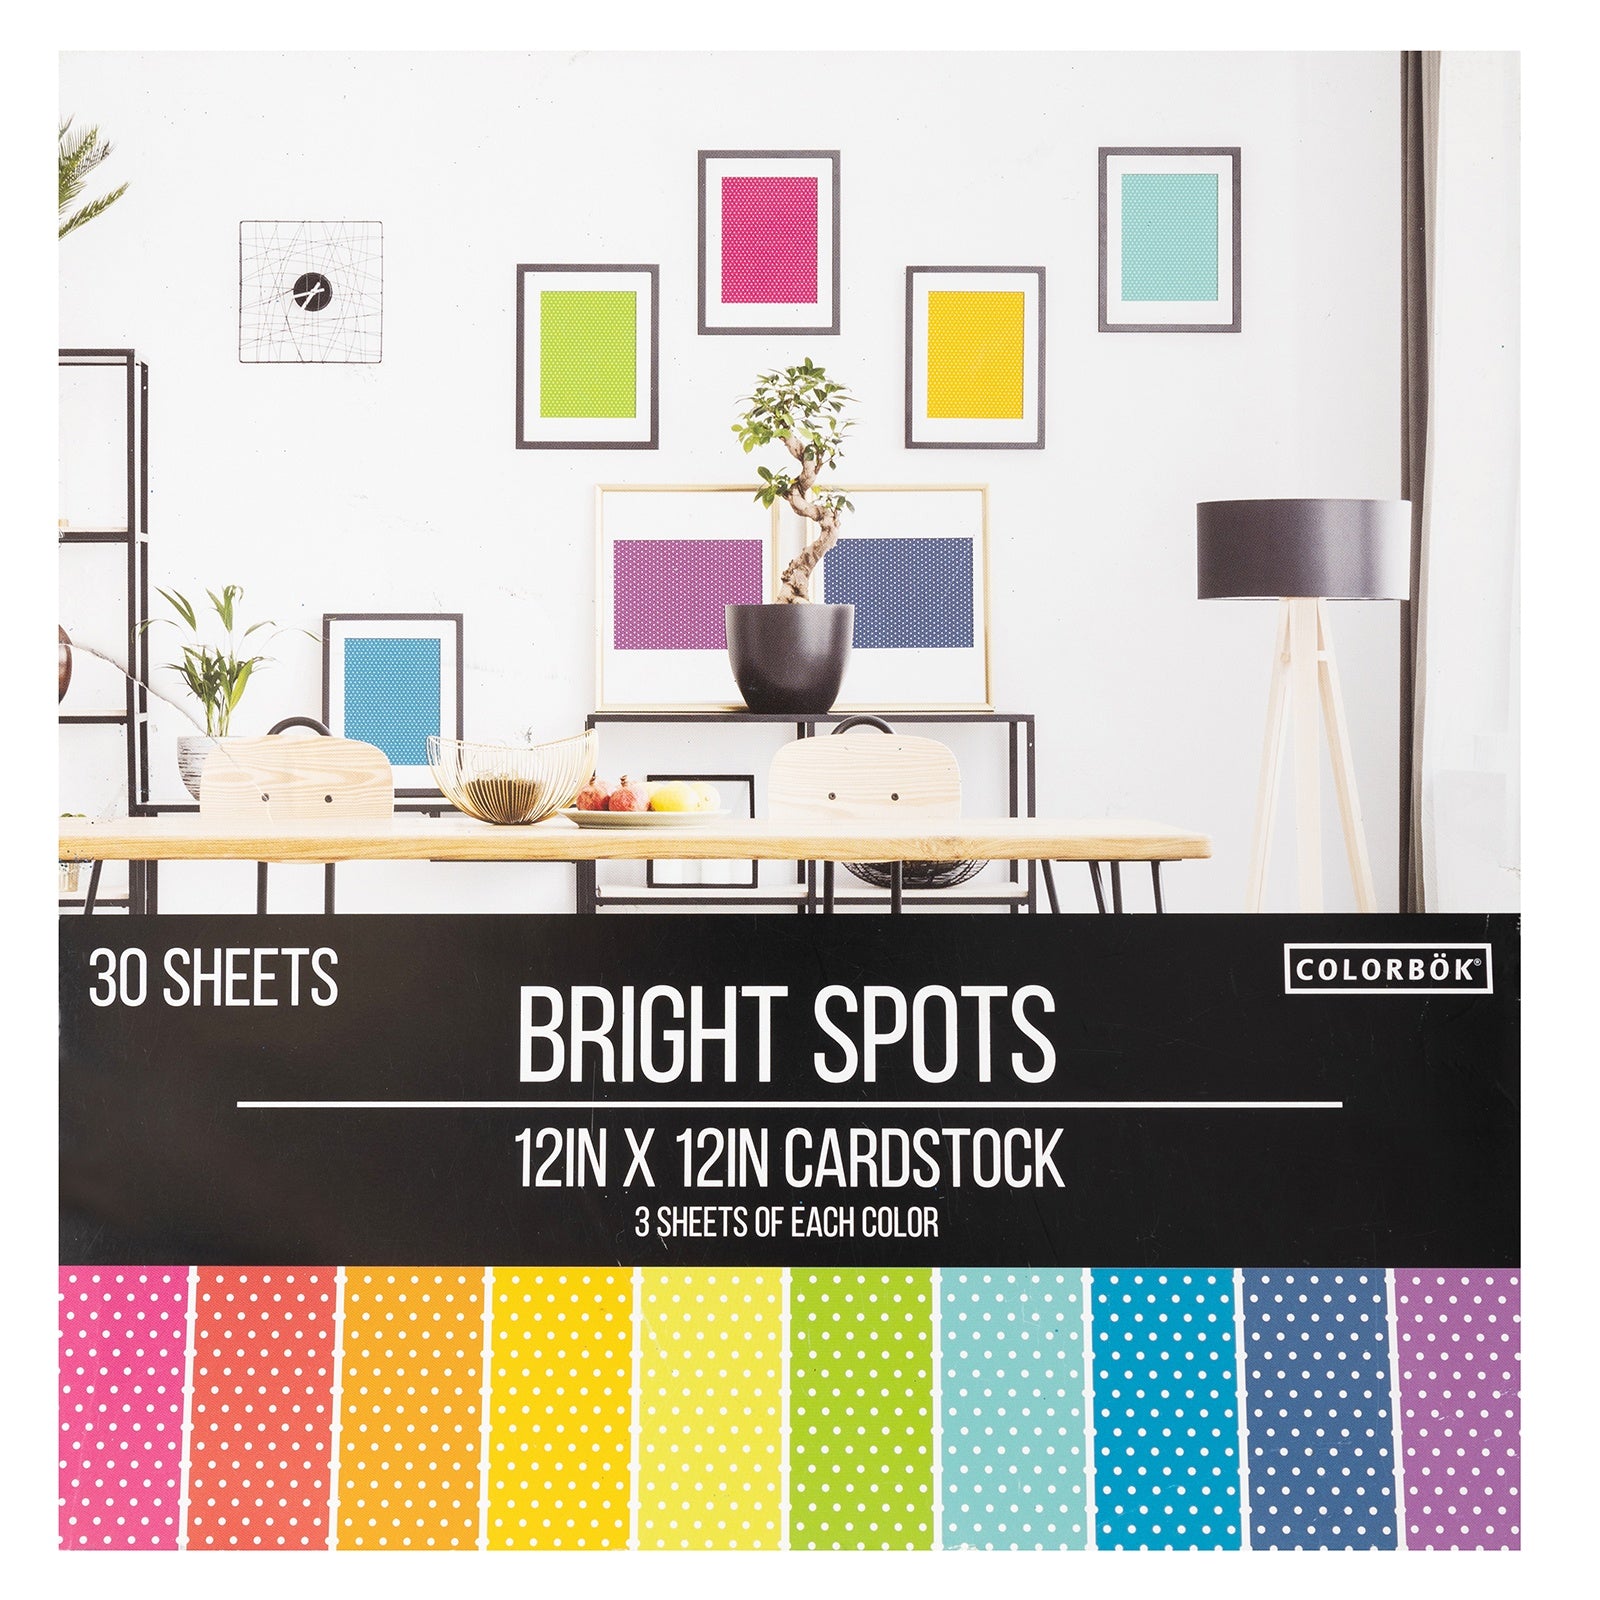 Colorbok Glitter Paper Pad 12 x 12 Rock Candy